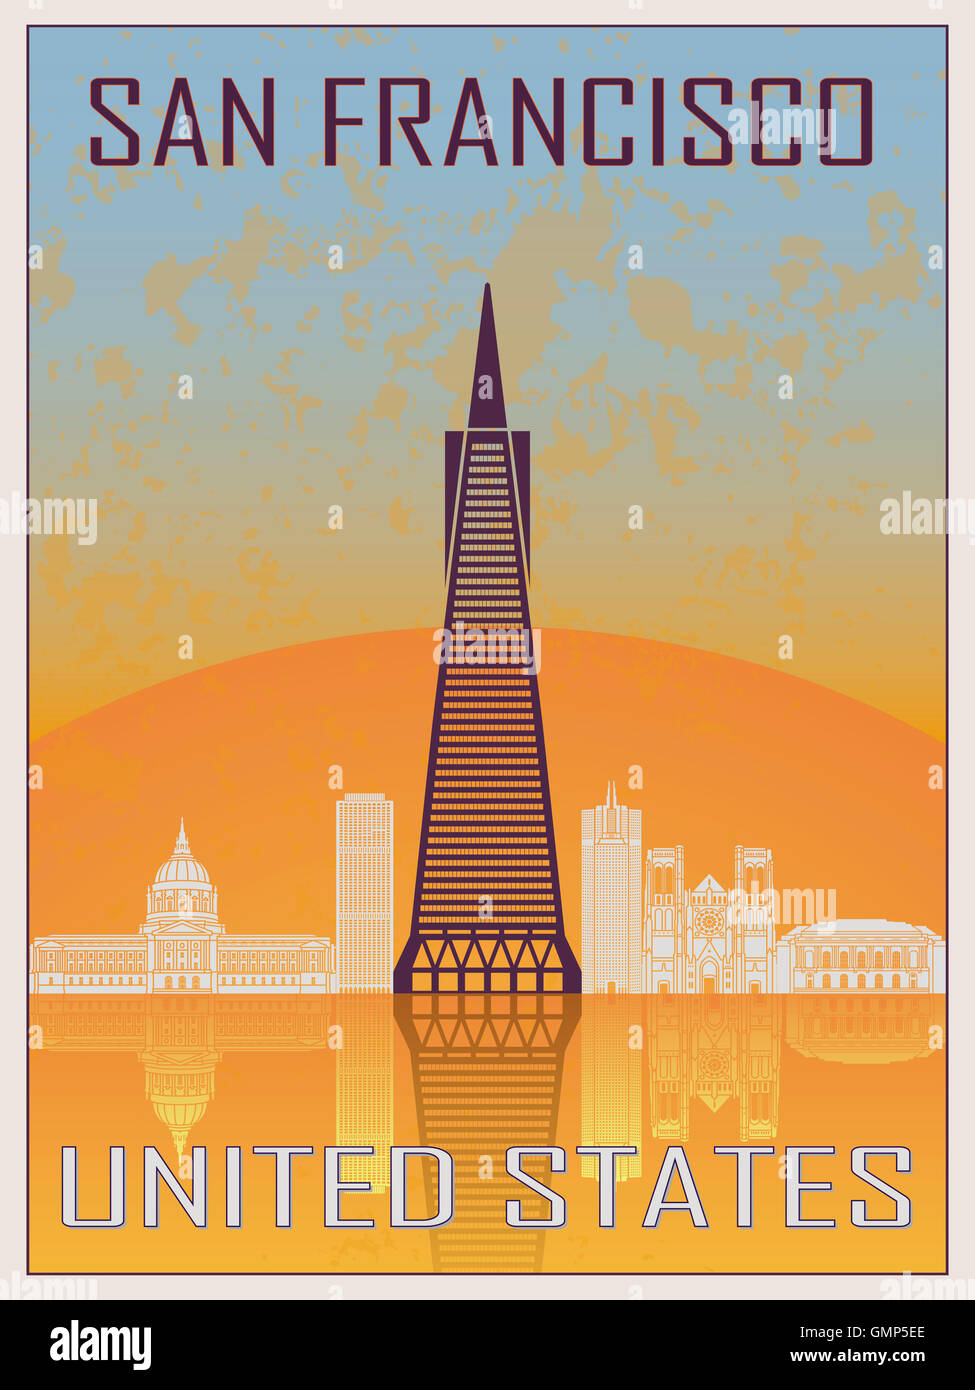 San Francisco 2 Vintage Poster in orange and blue textured background with skyline in white Stock Photo